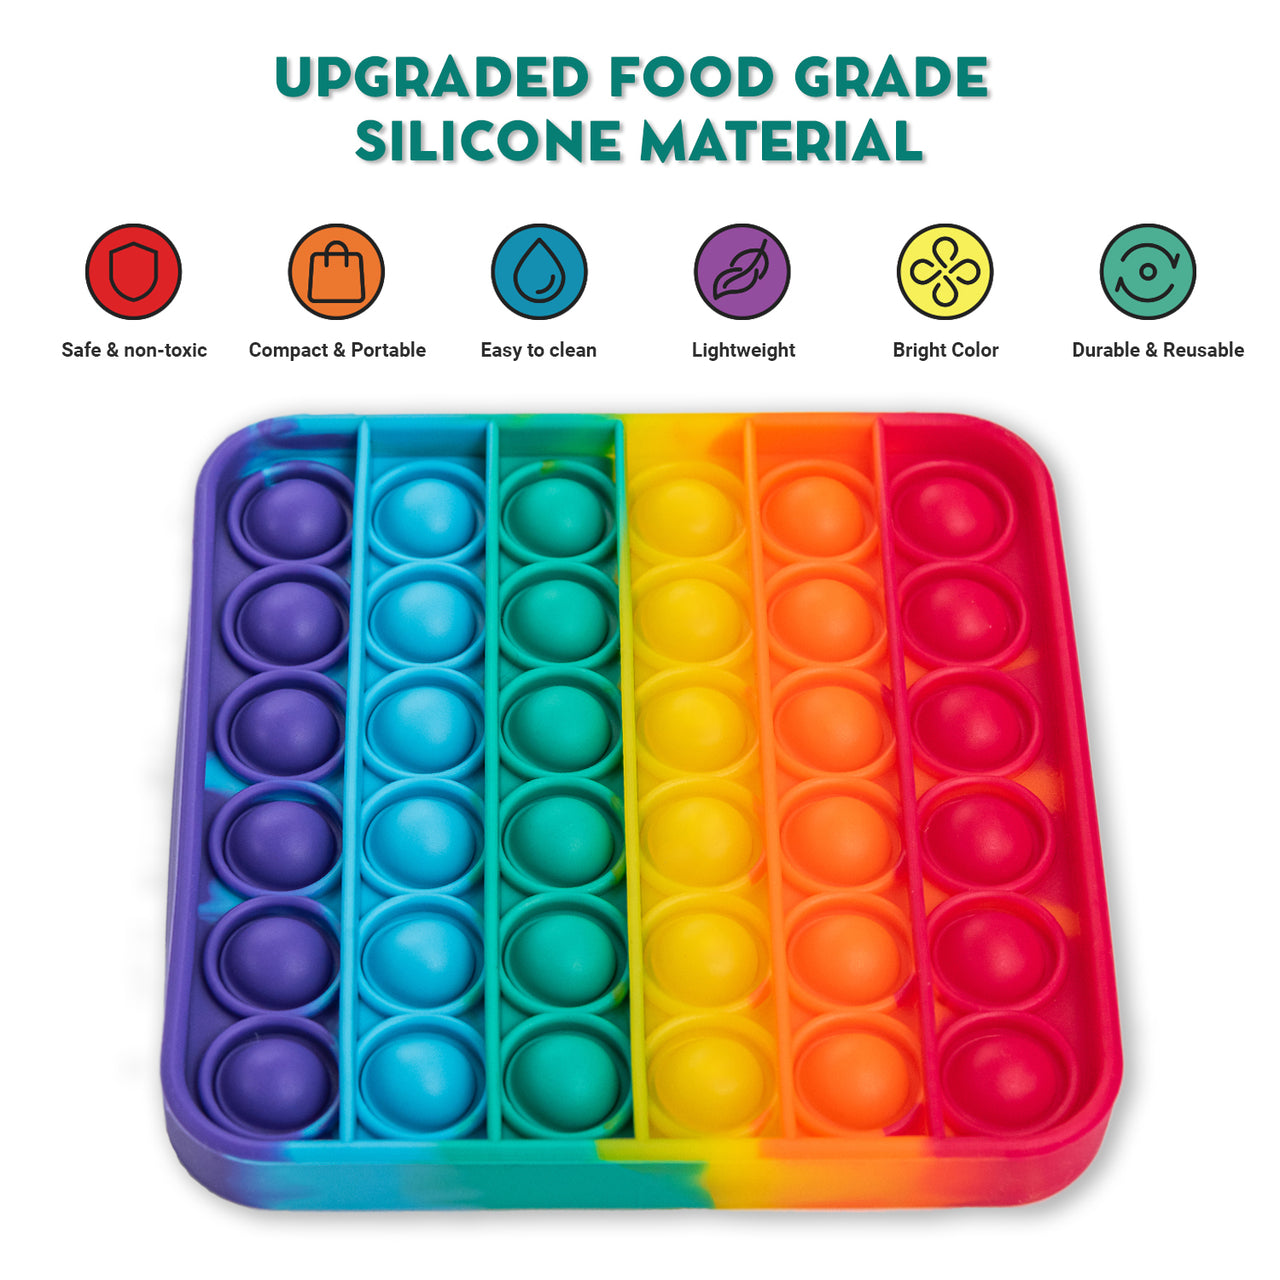 Upgraded Food Grade silicone material